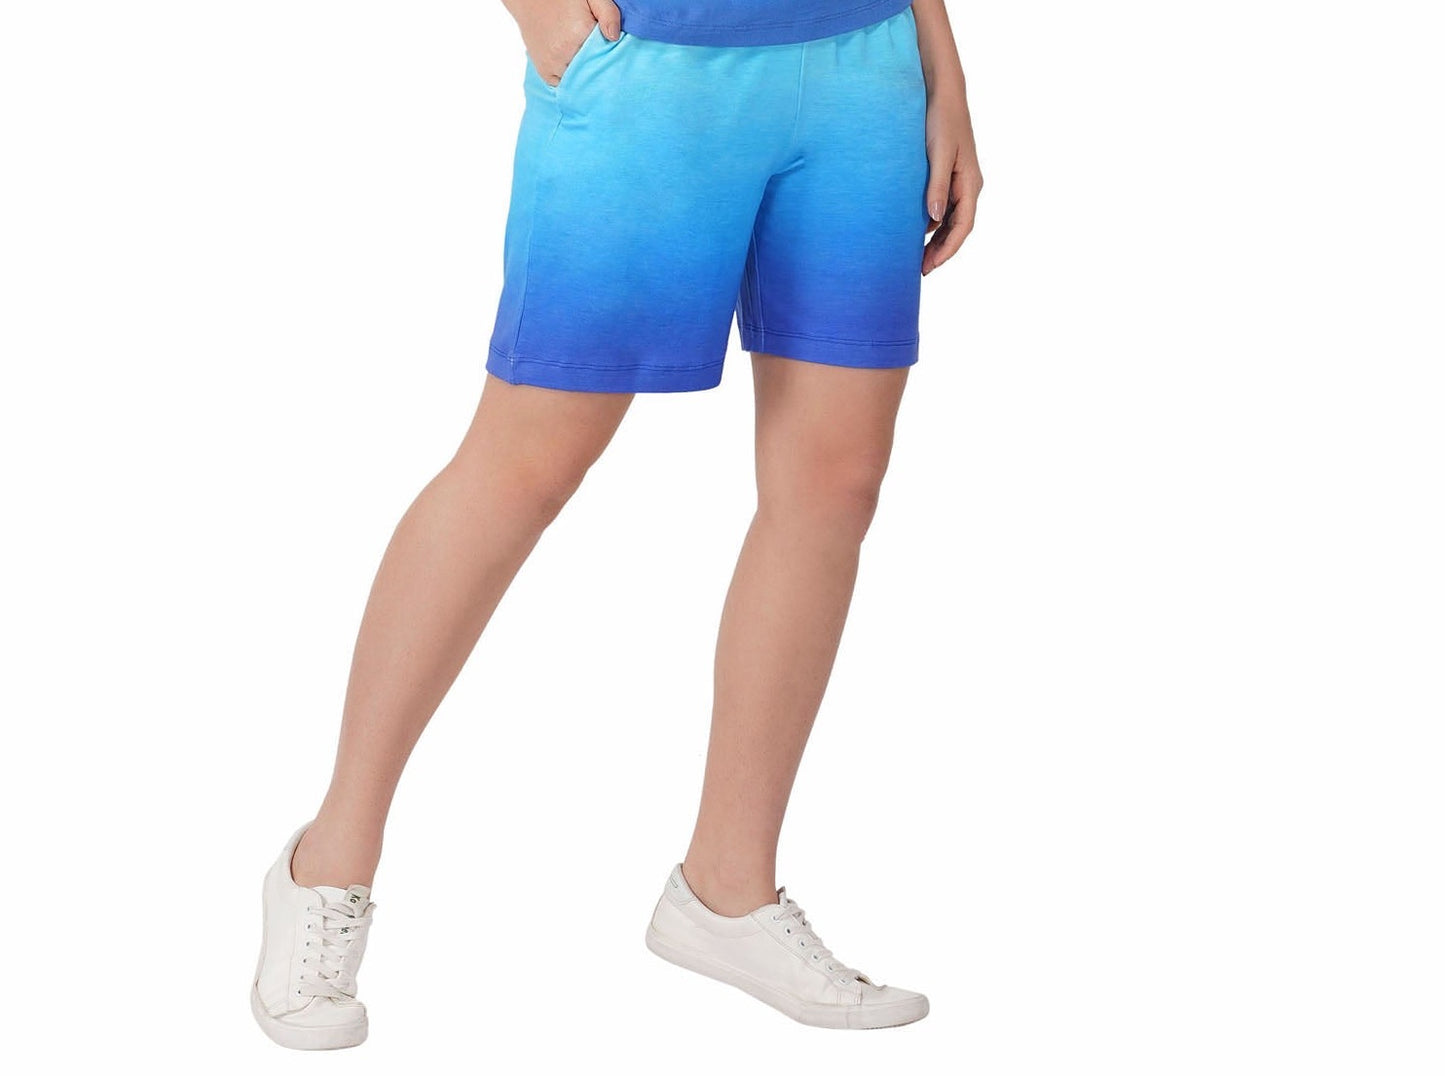 SLAY. Women's White to Blue Ombre Shorts